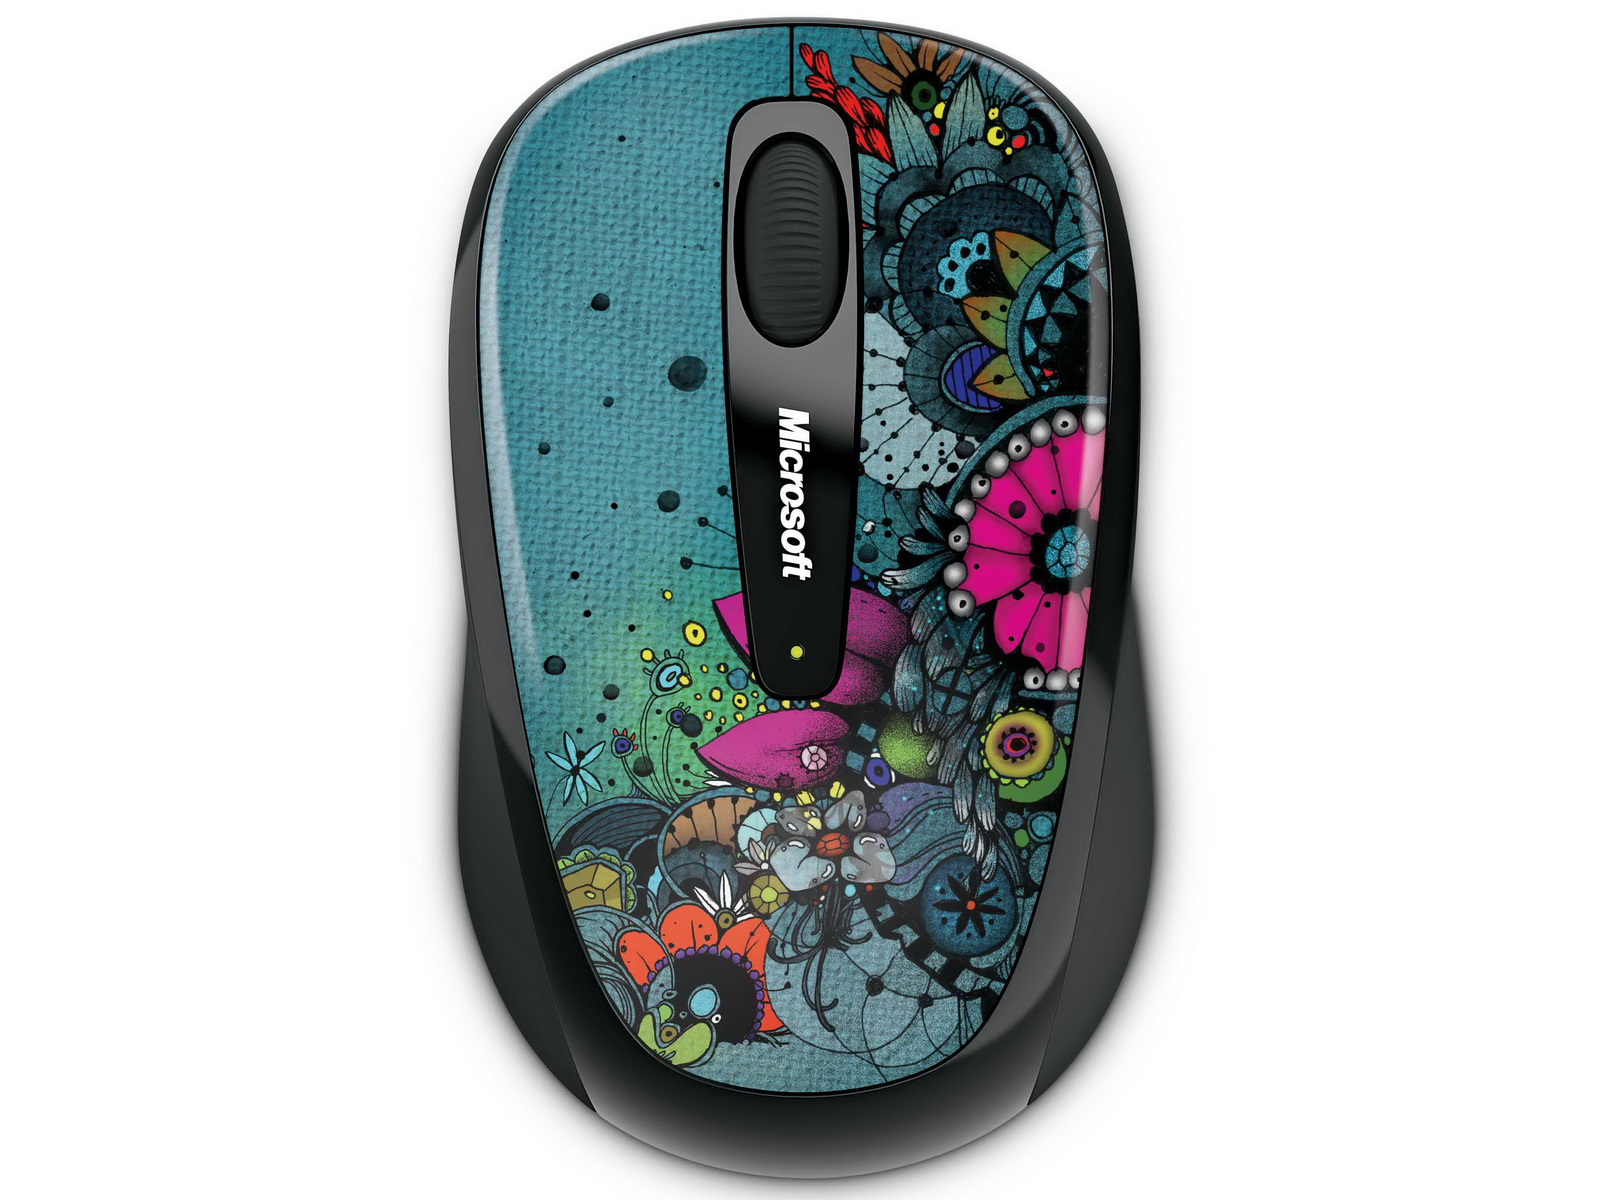 cleaning microsoft wireless mouse 3500